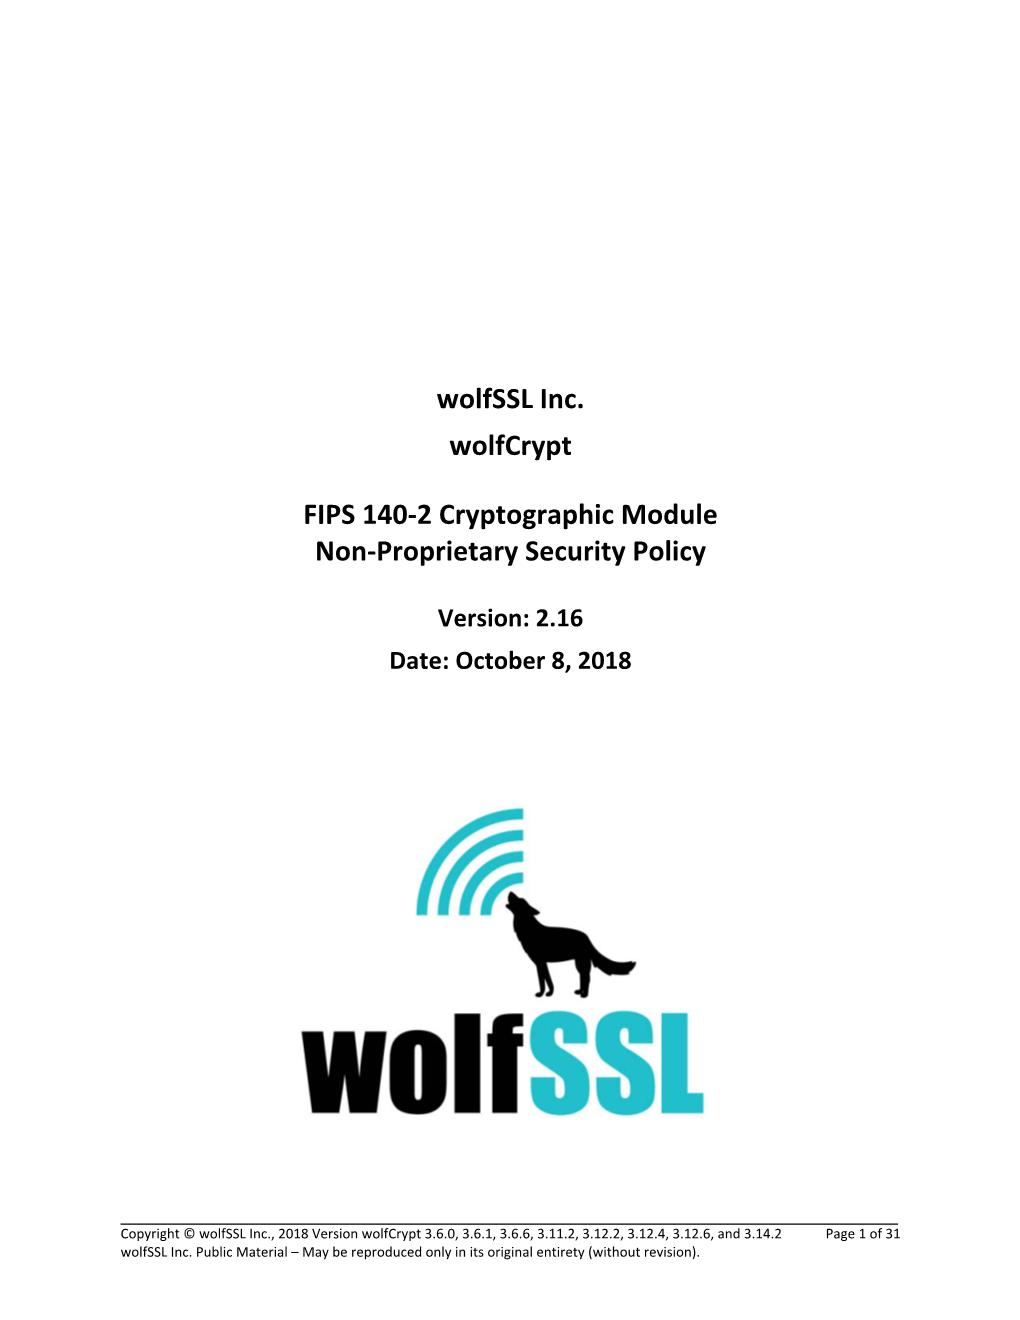 Wolfssl Inc. Wolfcrypt FIPS 140-2 Cryptographic Module Non